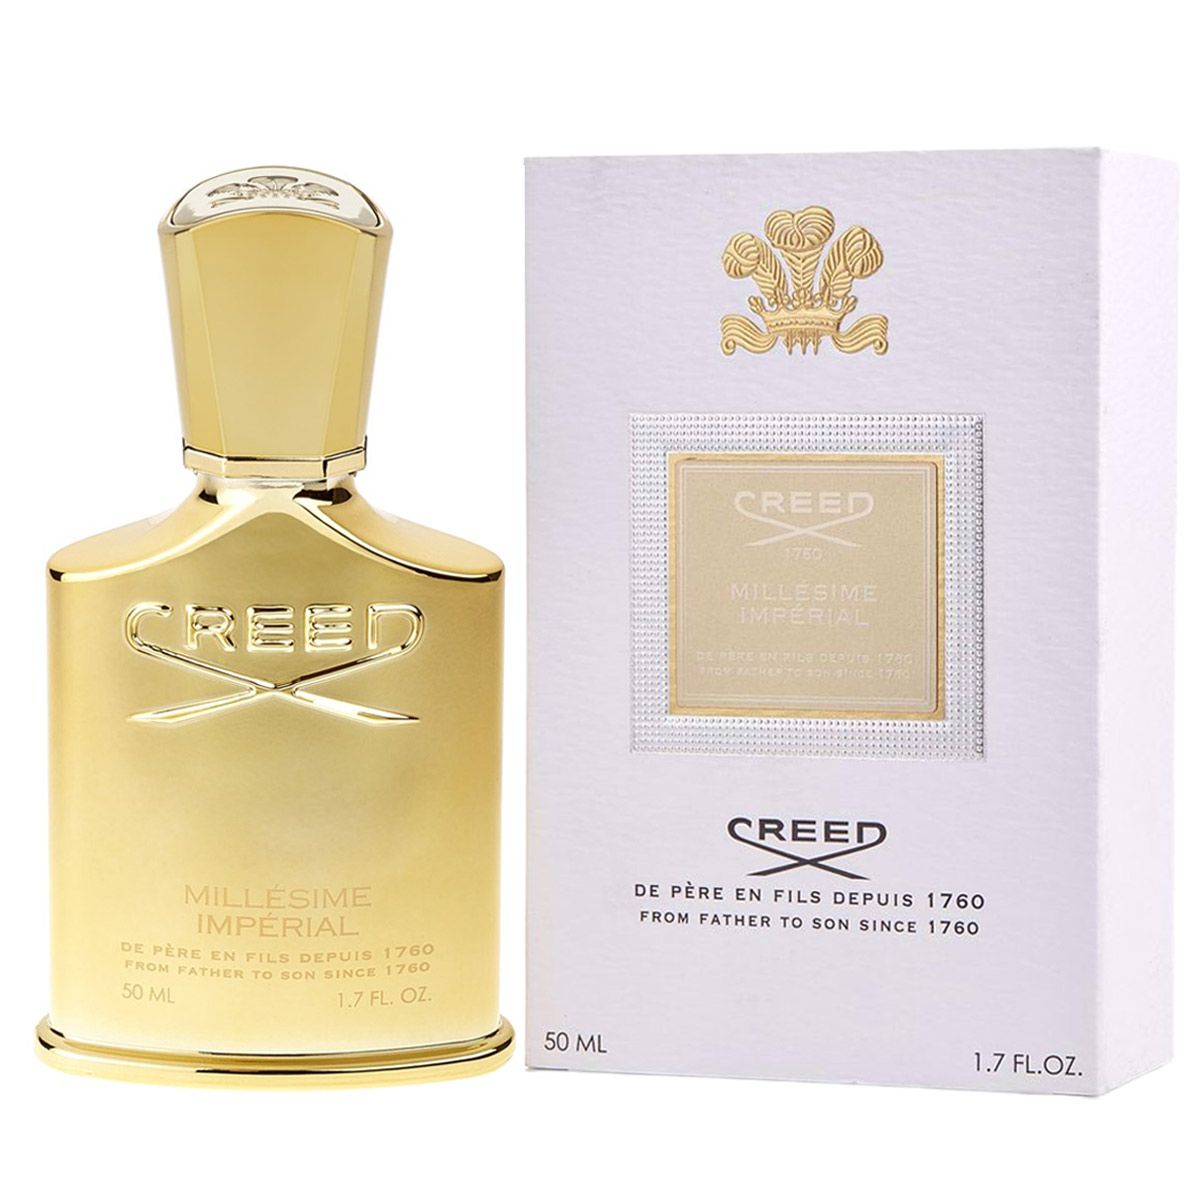  Creed Millesime Imperial 